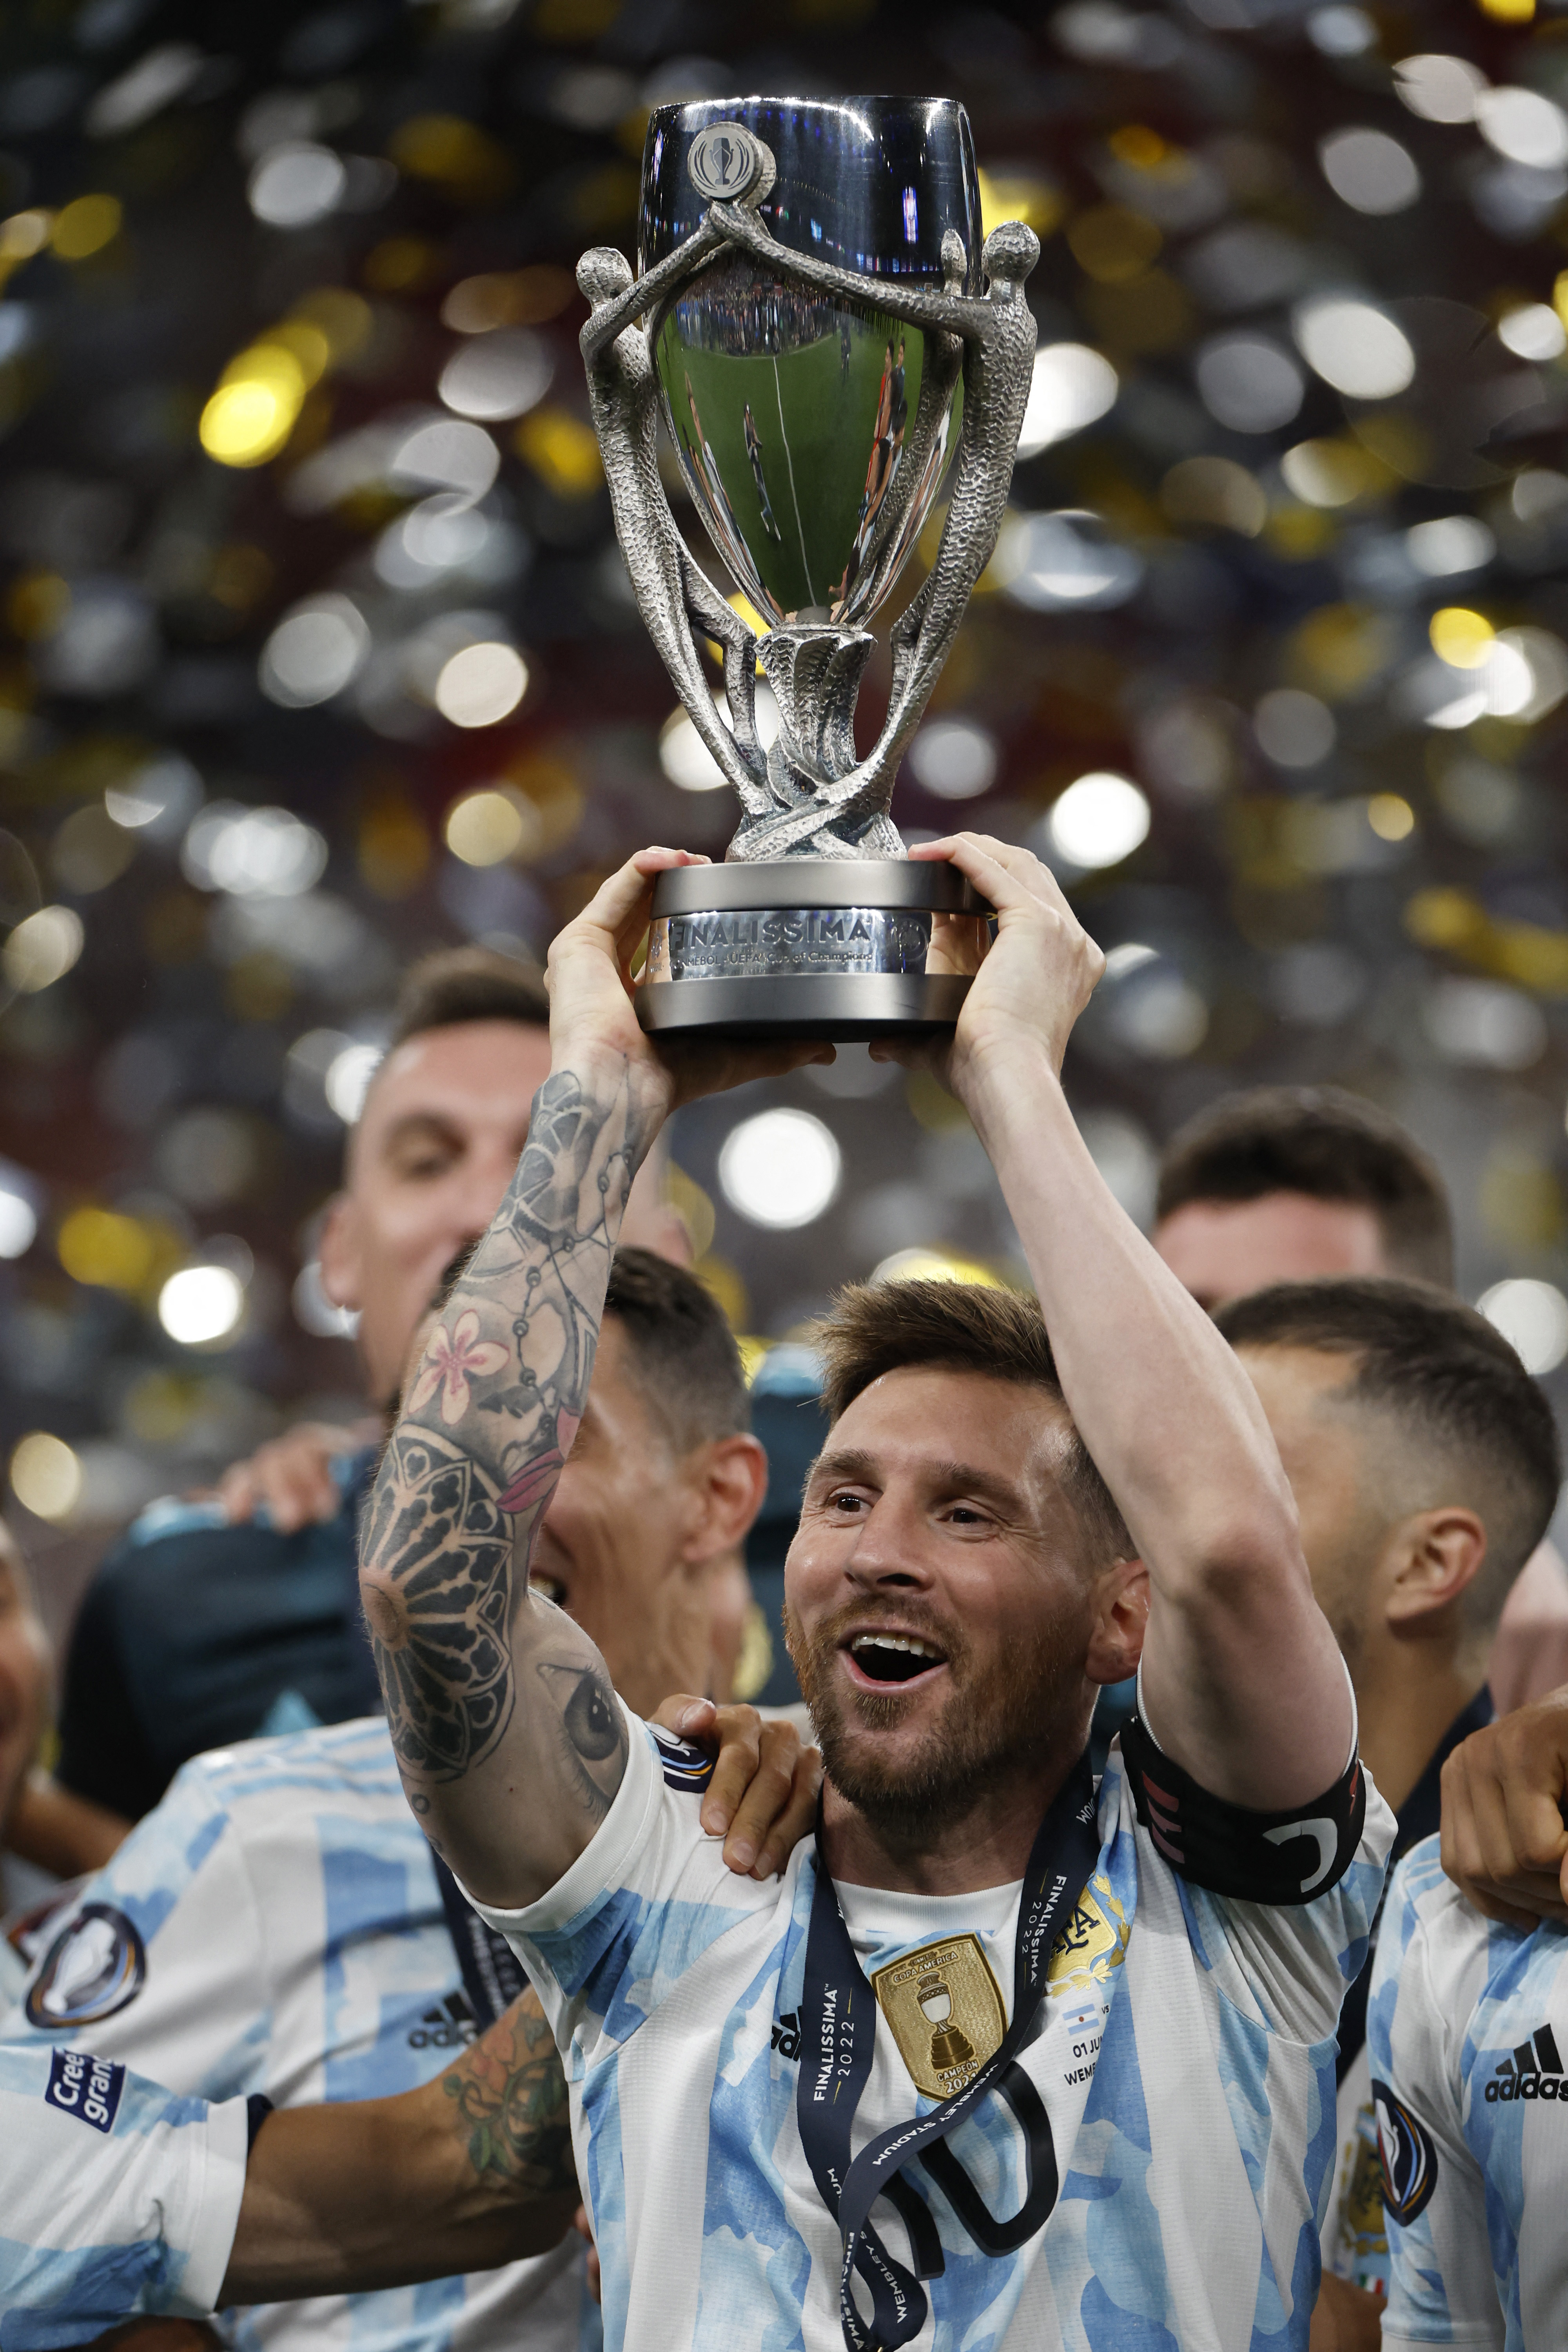 Lionel Messi is the most successful Argentine soccer player in history (REUTERS/Peter Cziborra)